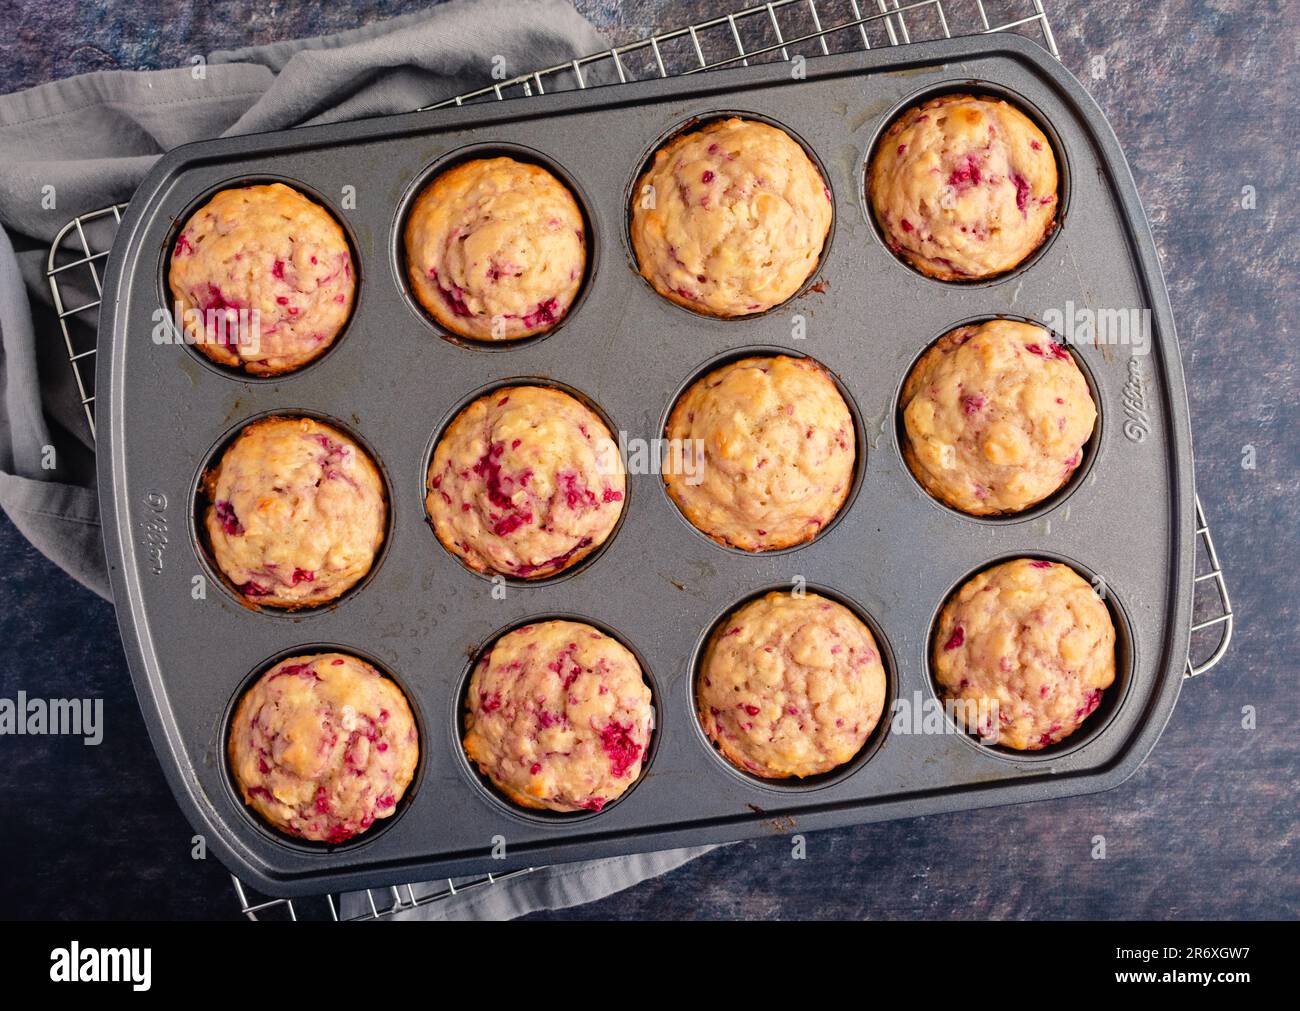 Freshly Baked Raspberry Muffins in a Nonstick Muffin Pan: Breakfast or dessert muffins made with fruit viewed from directly above in muffin tin Stock Photo